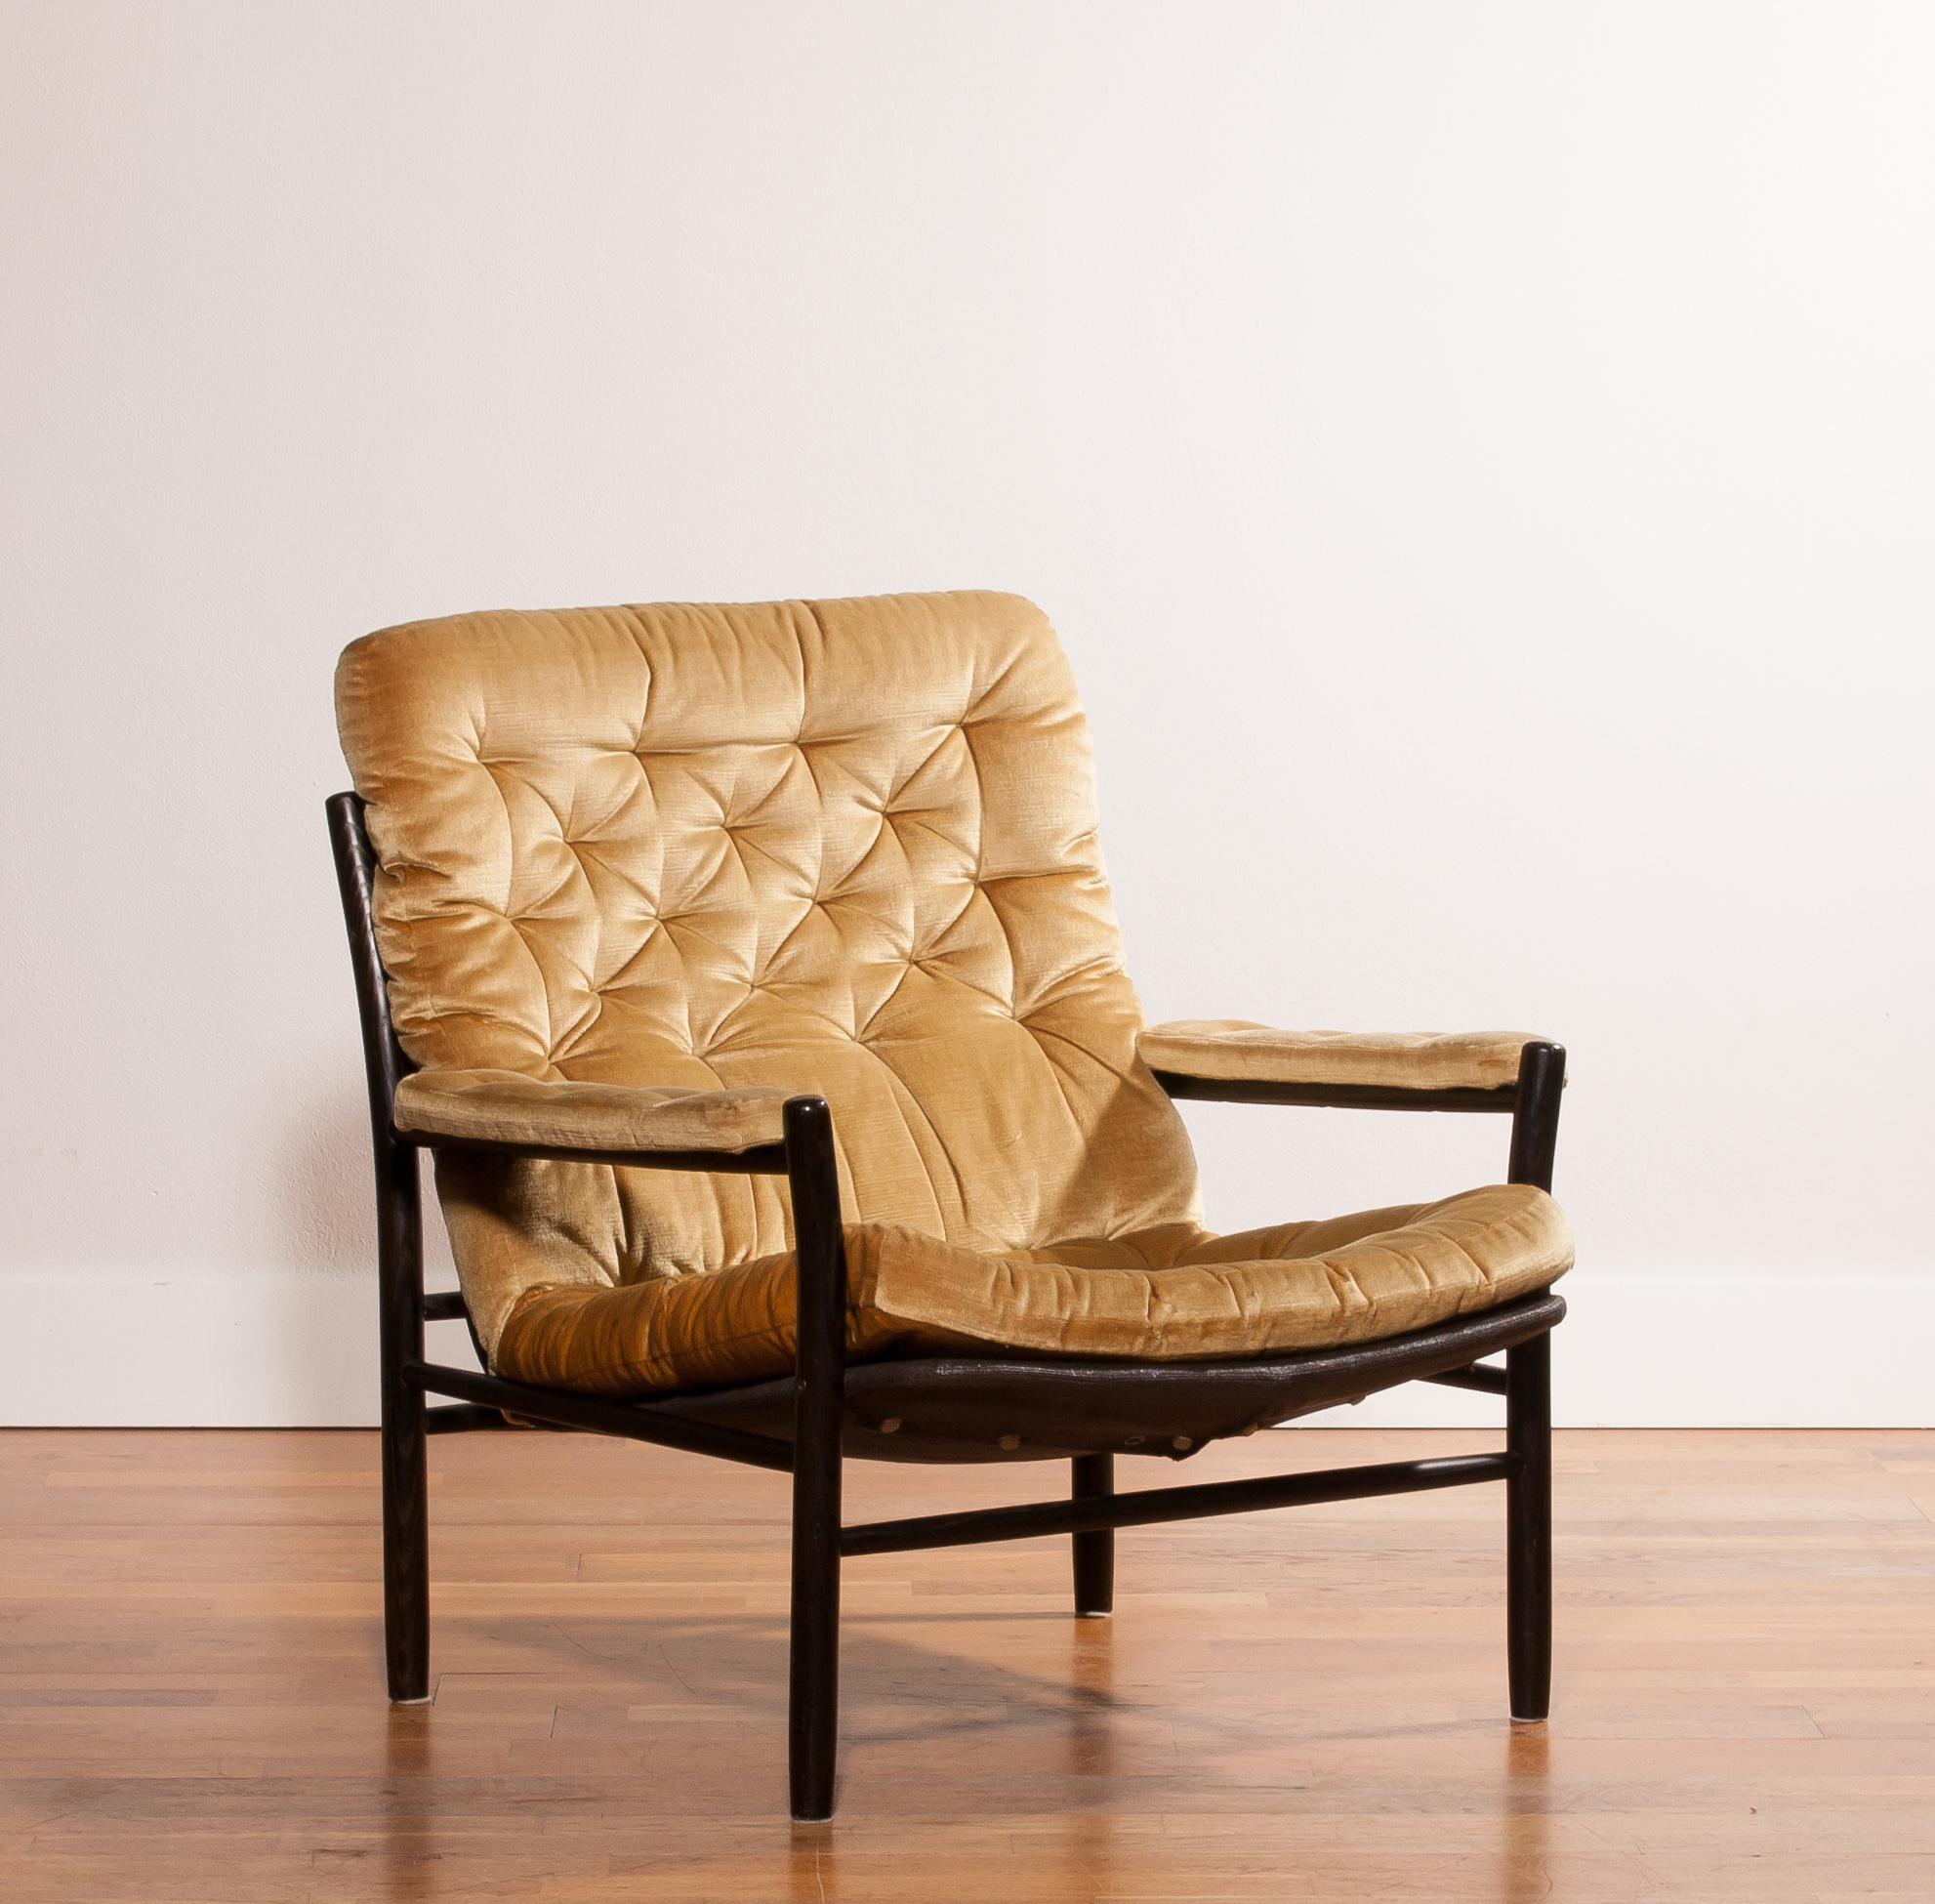 This chair in gold-yellow velours with a black wooden frame was designed by Kenneth Bergenblad and manufactured by DUX, Sweden.
It is in a very nice condition.
Period 1970s
Dimensions: H. 83 cm, W. 80 cm, D. 69 cm, SH. 37 cm.